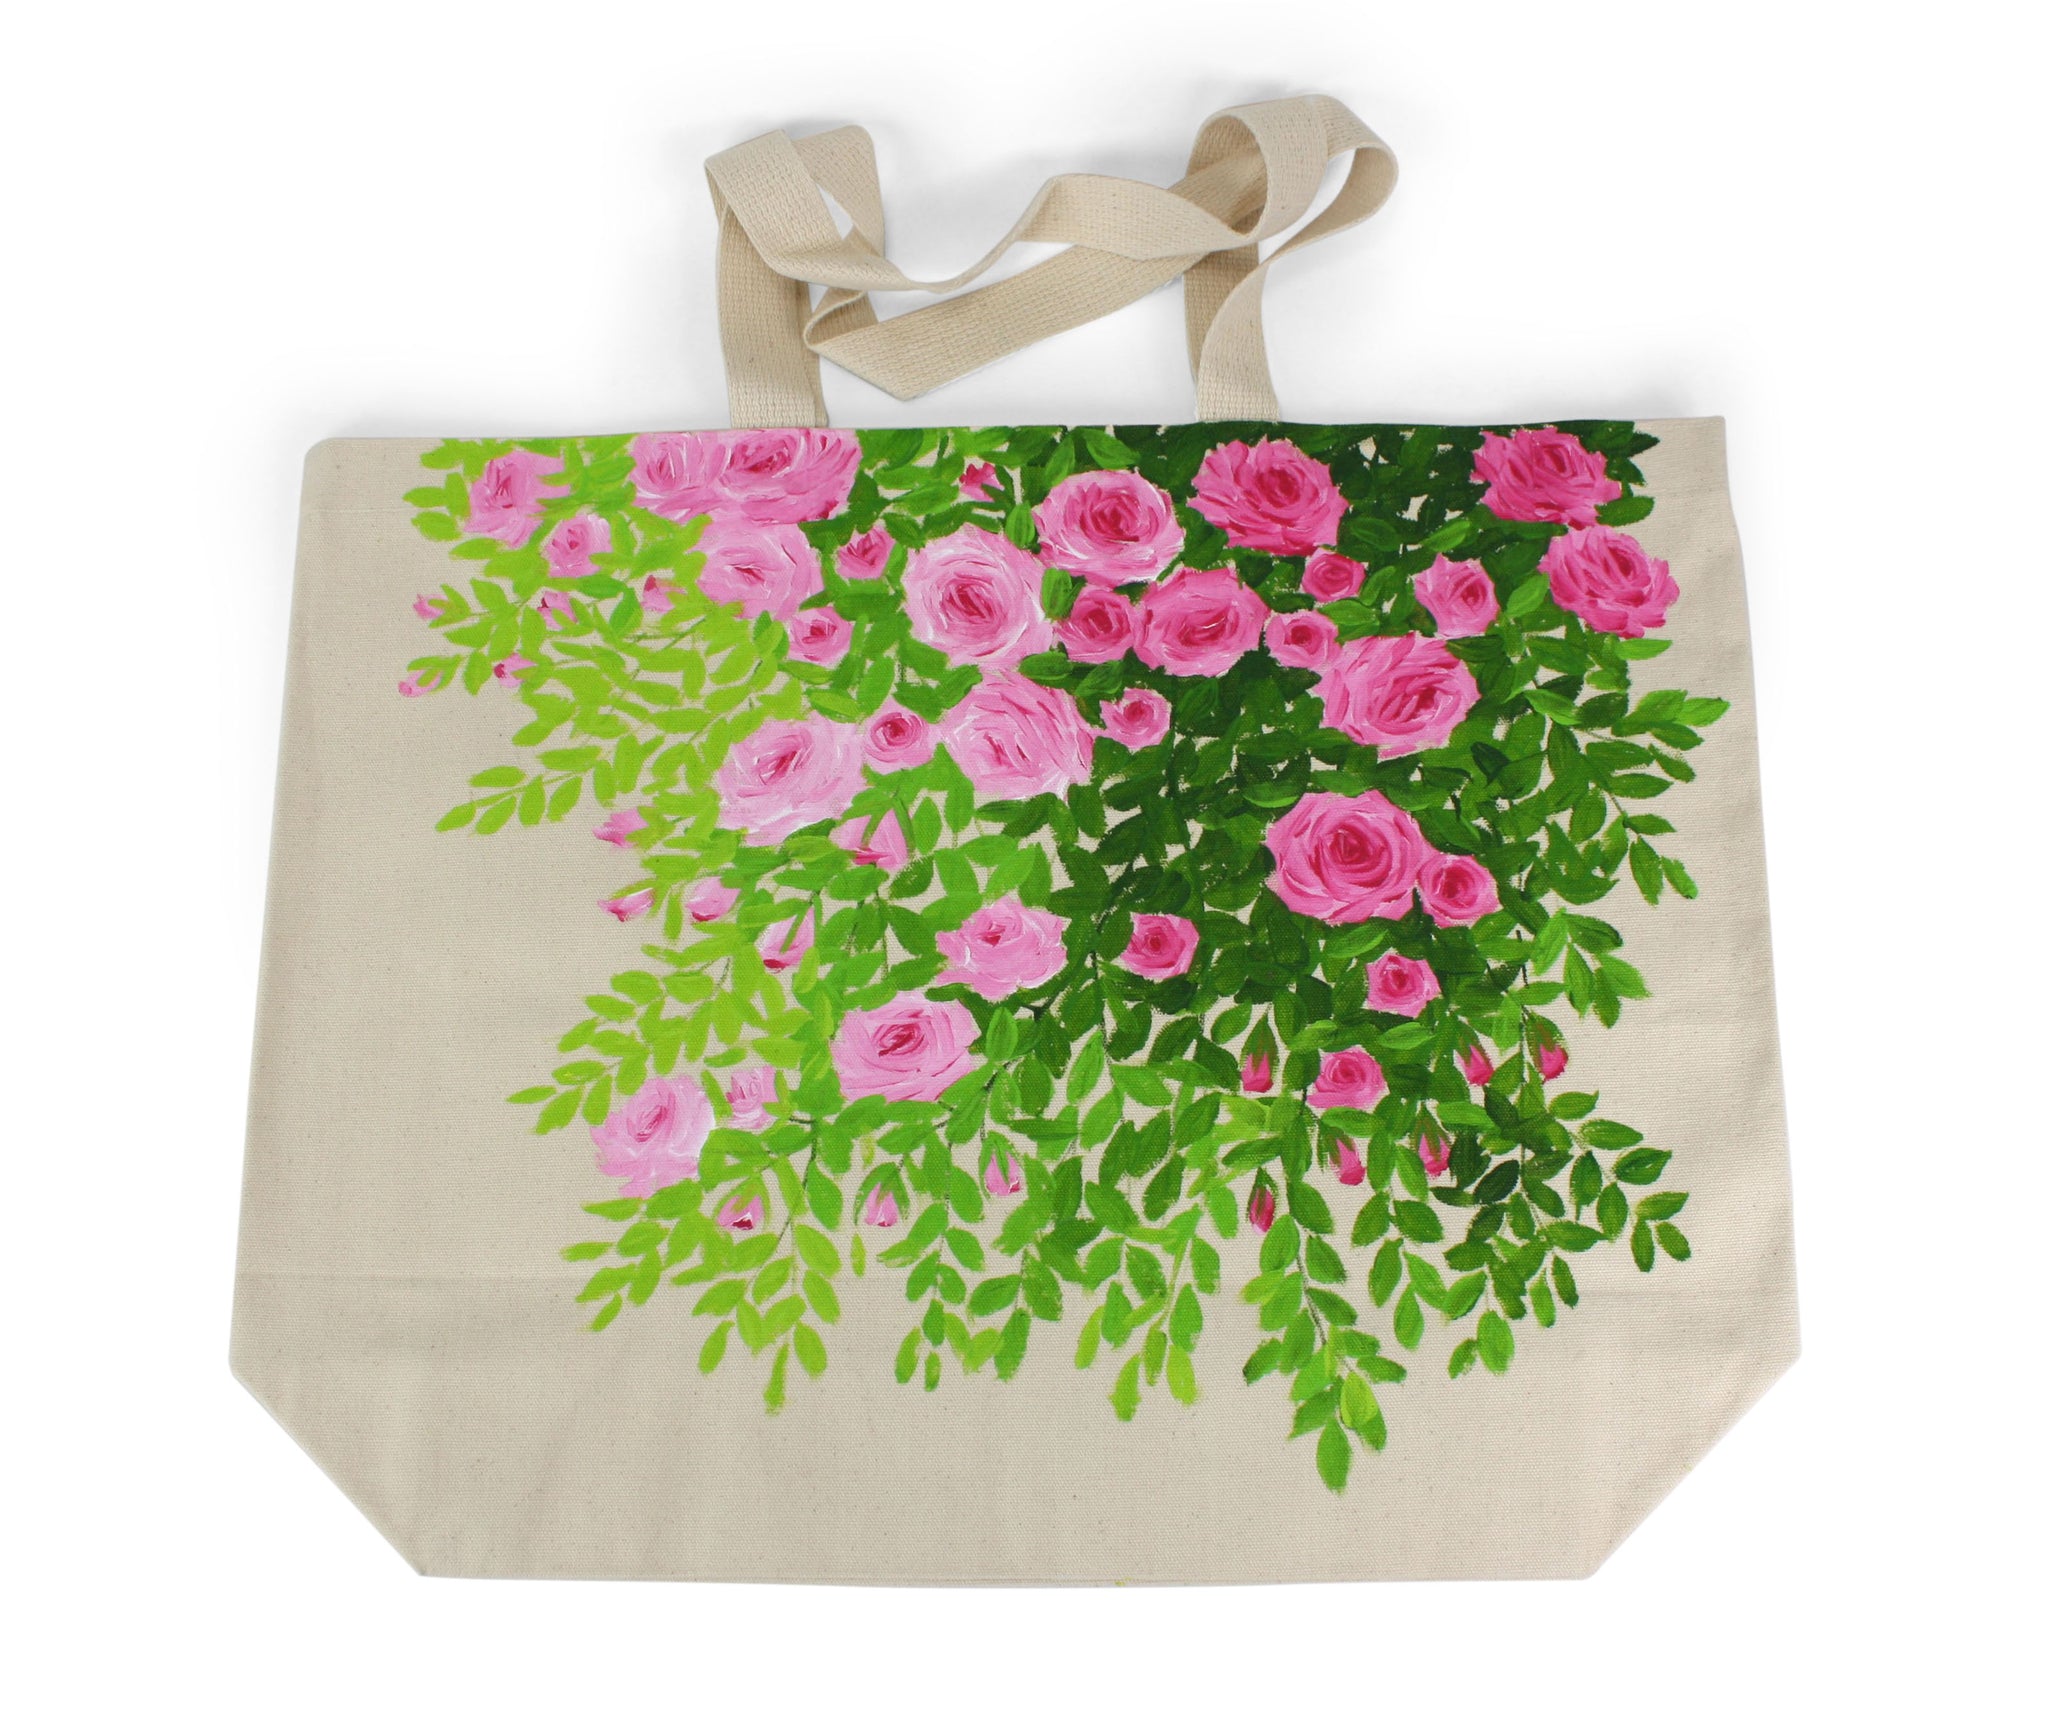 55cm Handmade canvas shopping bag, tote bag, extra large size